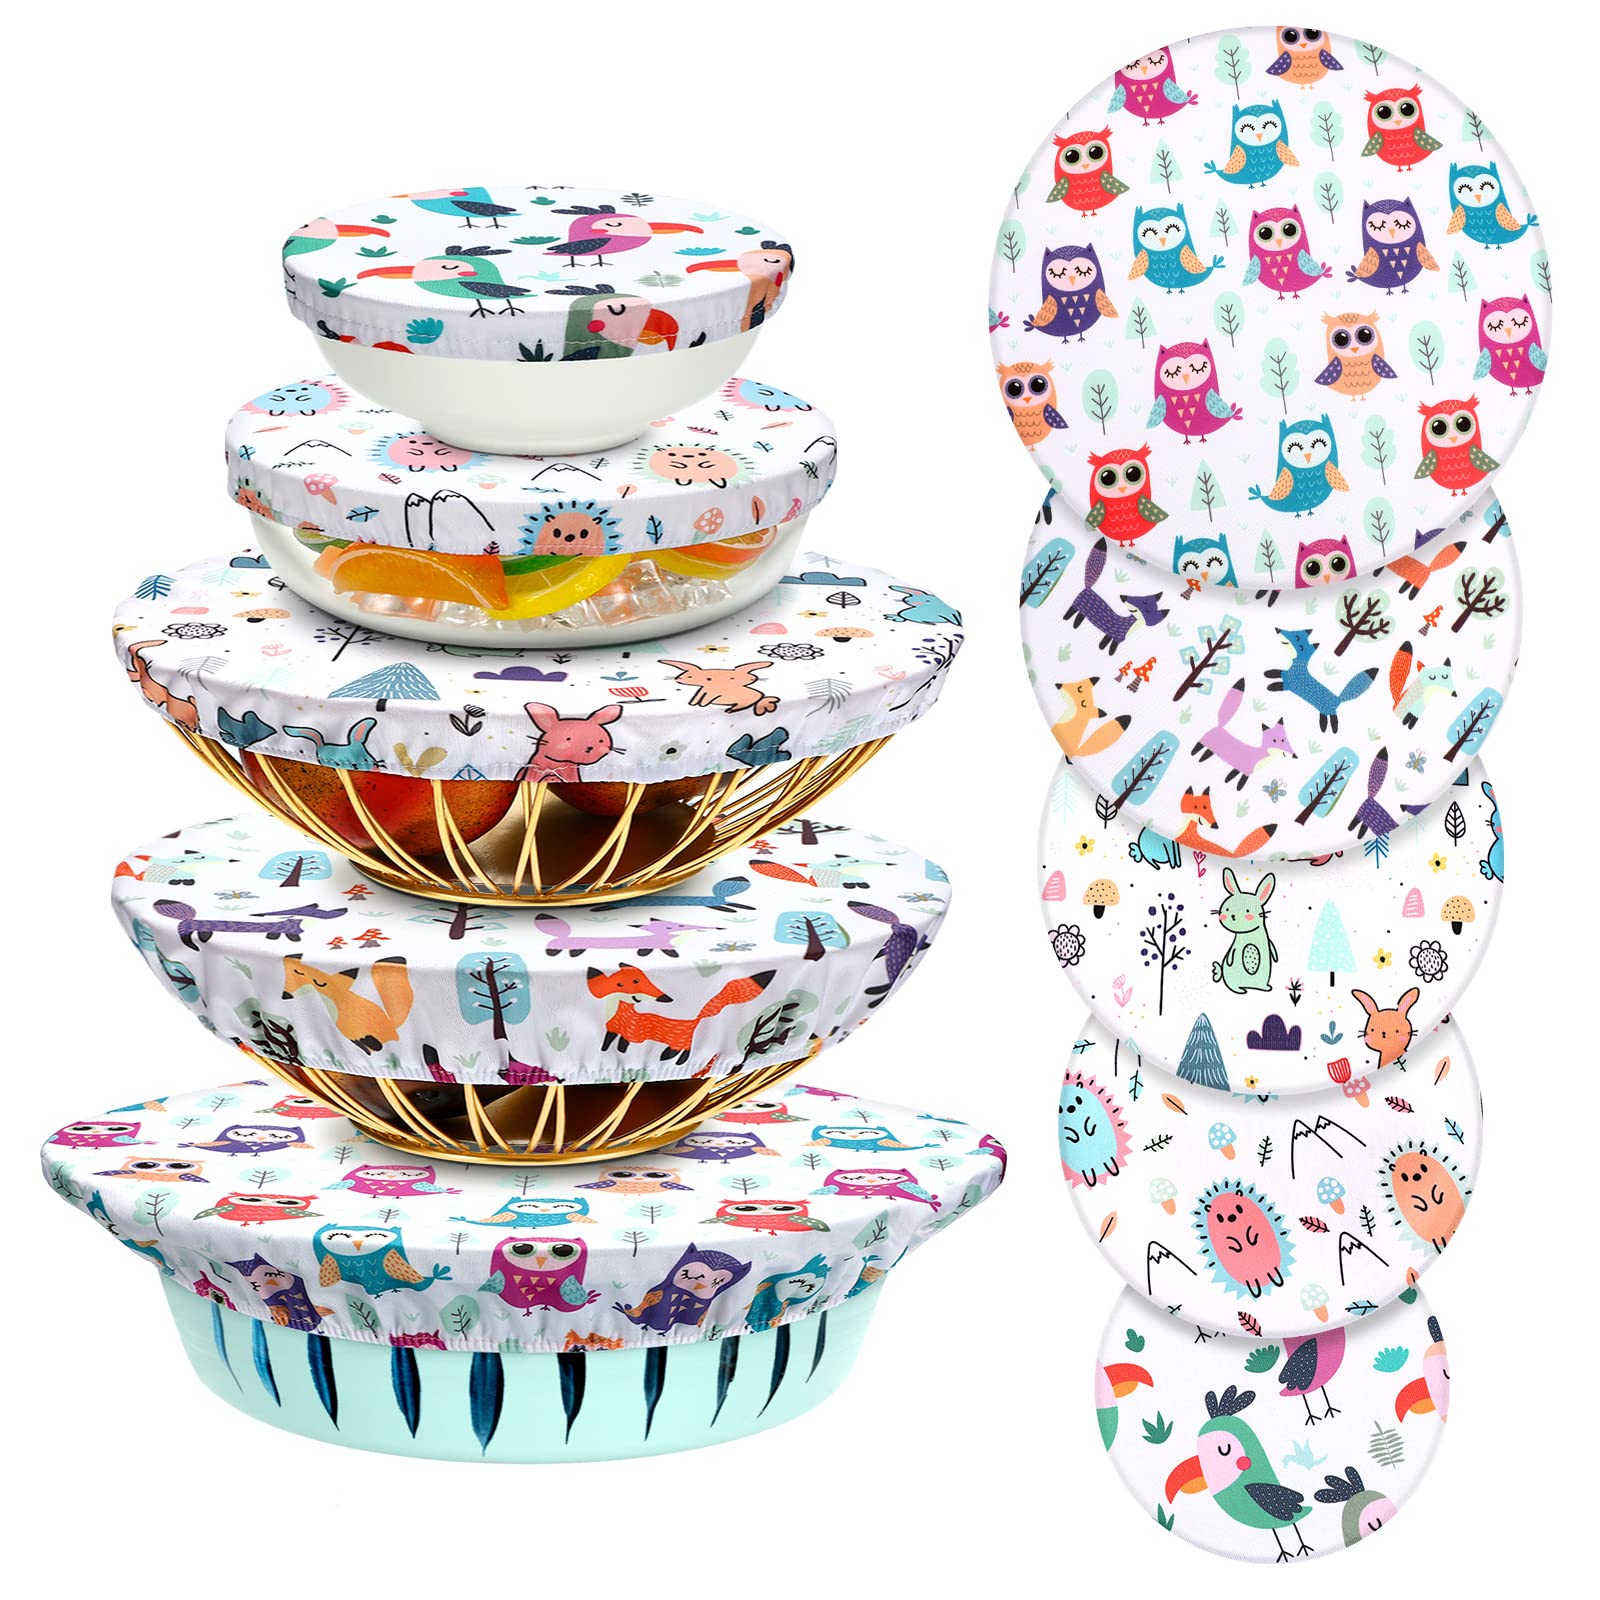 Wholesale Cute Style Reusable Bowl Covers Elastic Food Storage Covers Cotton Bread Covers Lids for Food, Fruits, Leftover